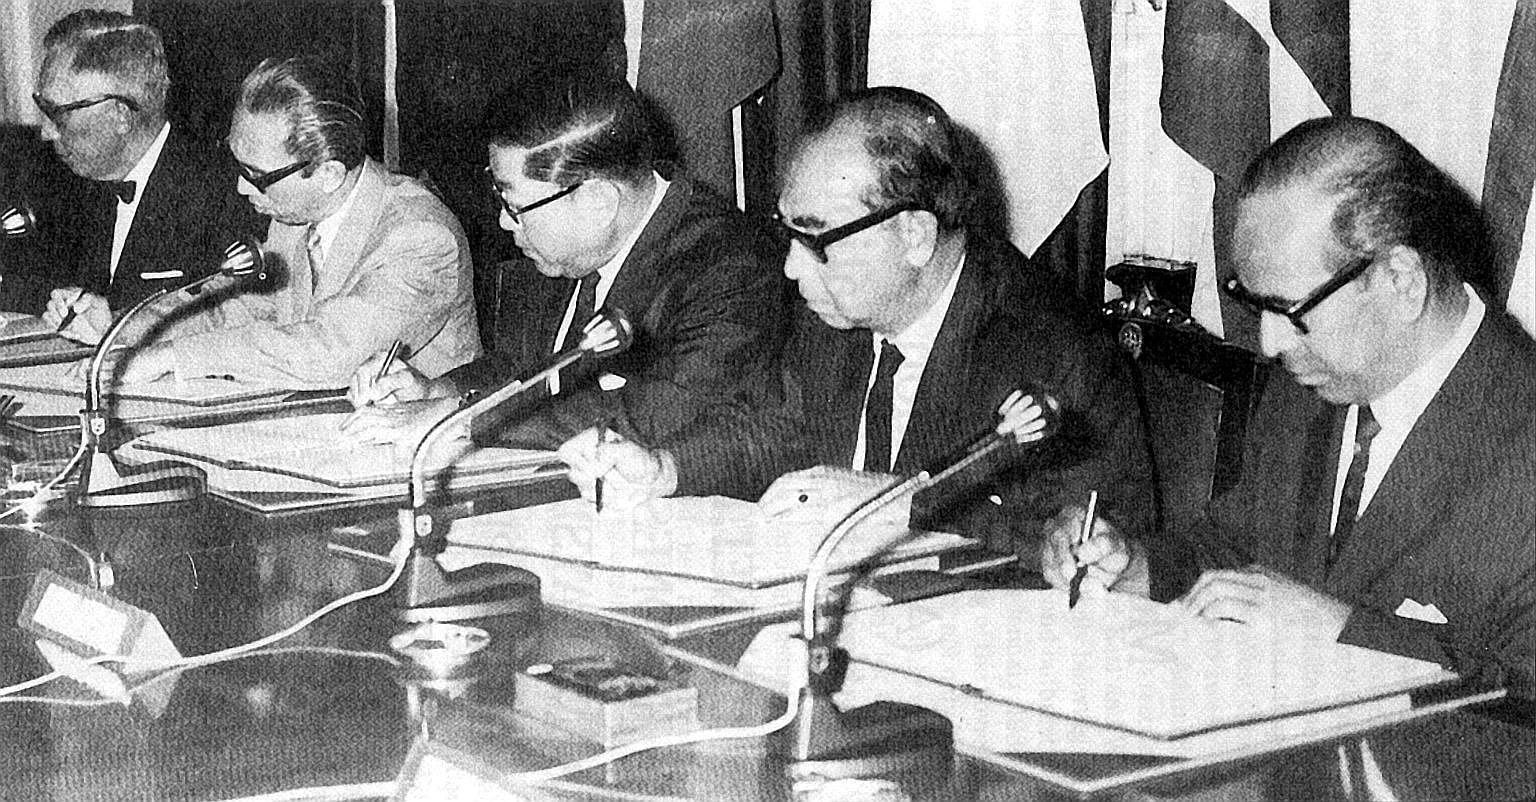 Singapore's foreign minister S. Rajaratnam (far right) at the historic meeting in Bangkok to sign the founding of Asean declaration on Aug 8, 1967, together with (from left) foreign ministers Narciso Ramos of the Philippines, Adam Malik of Indonesia,